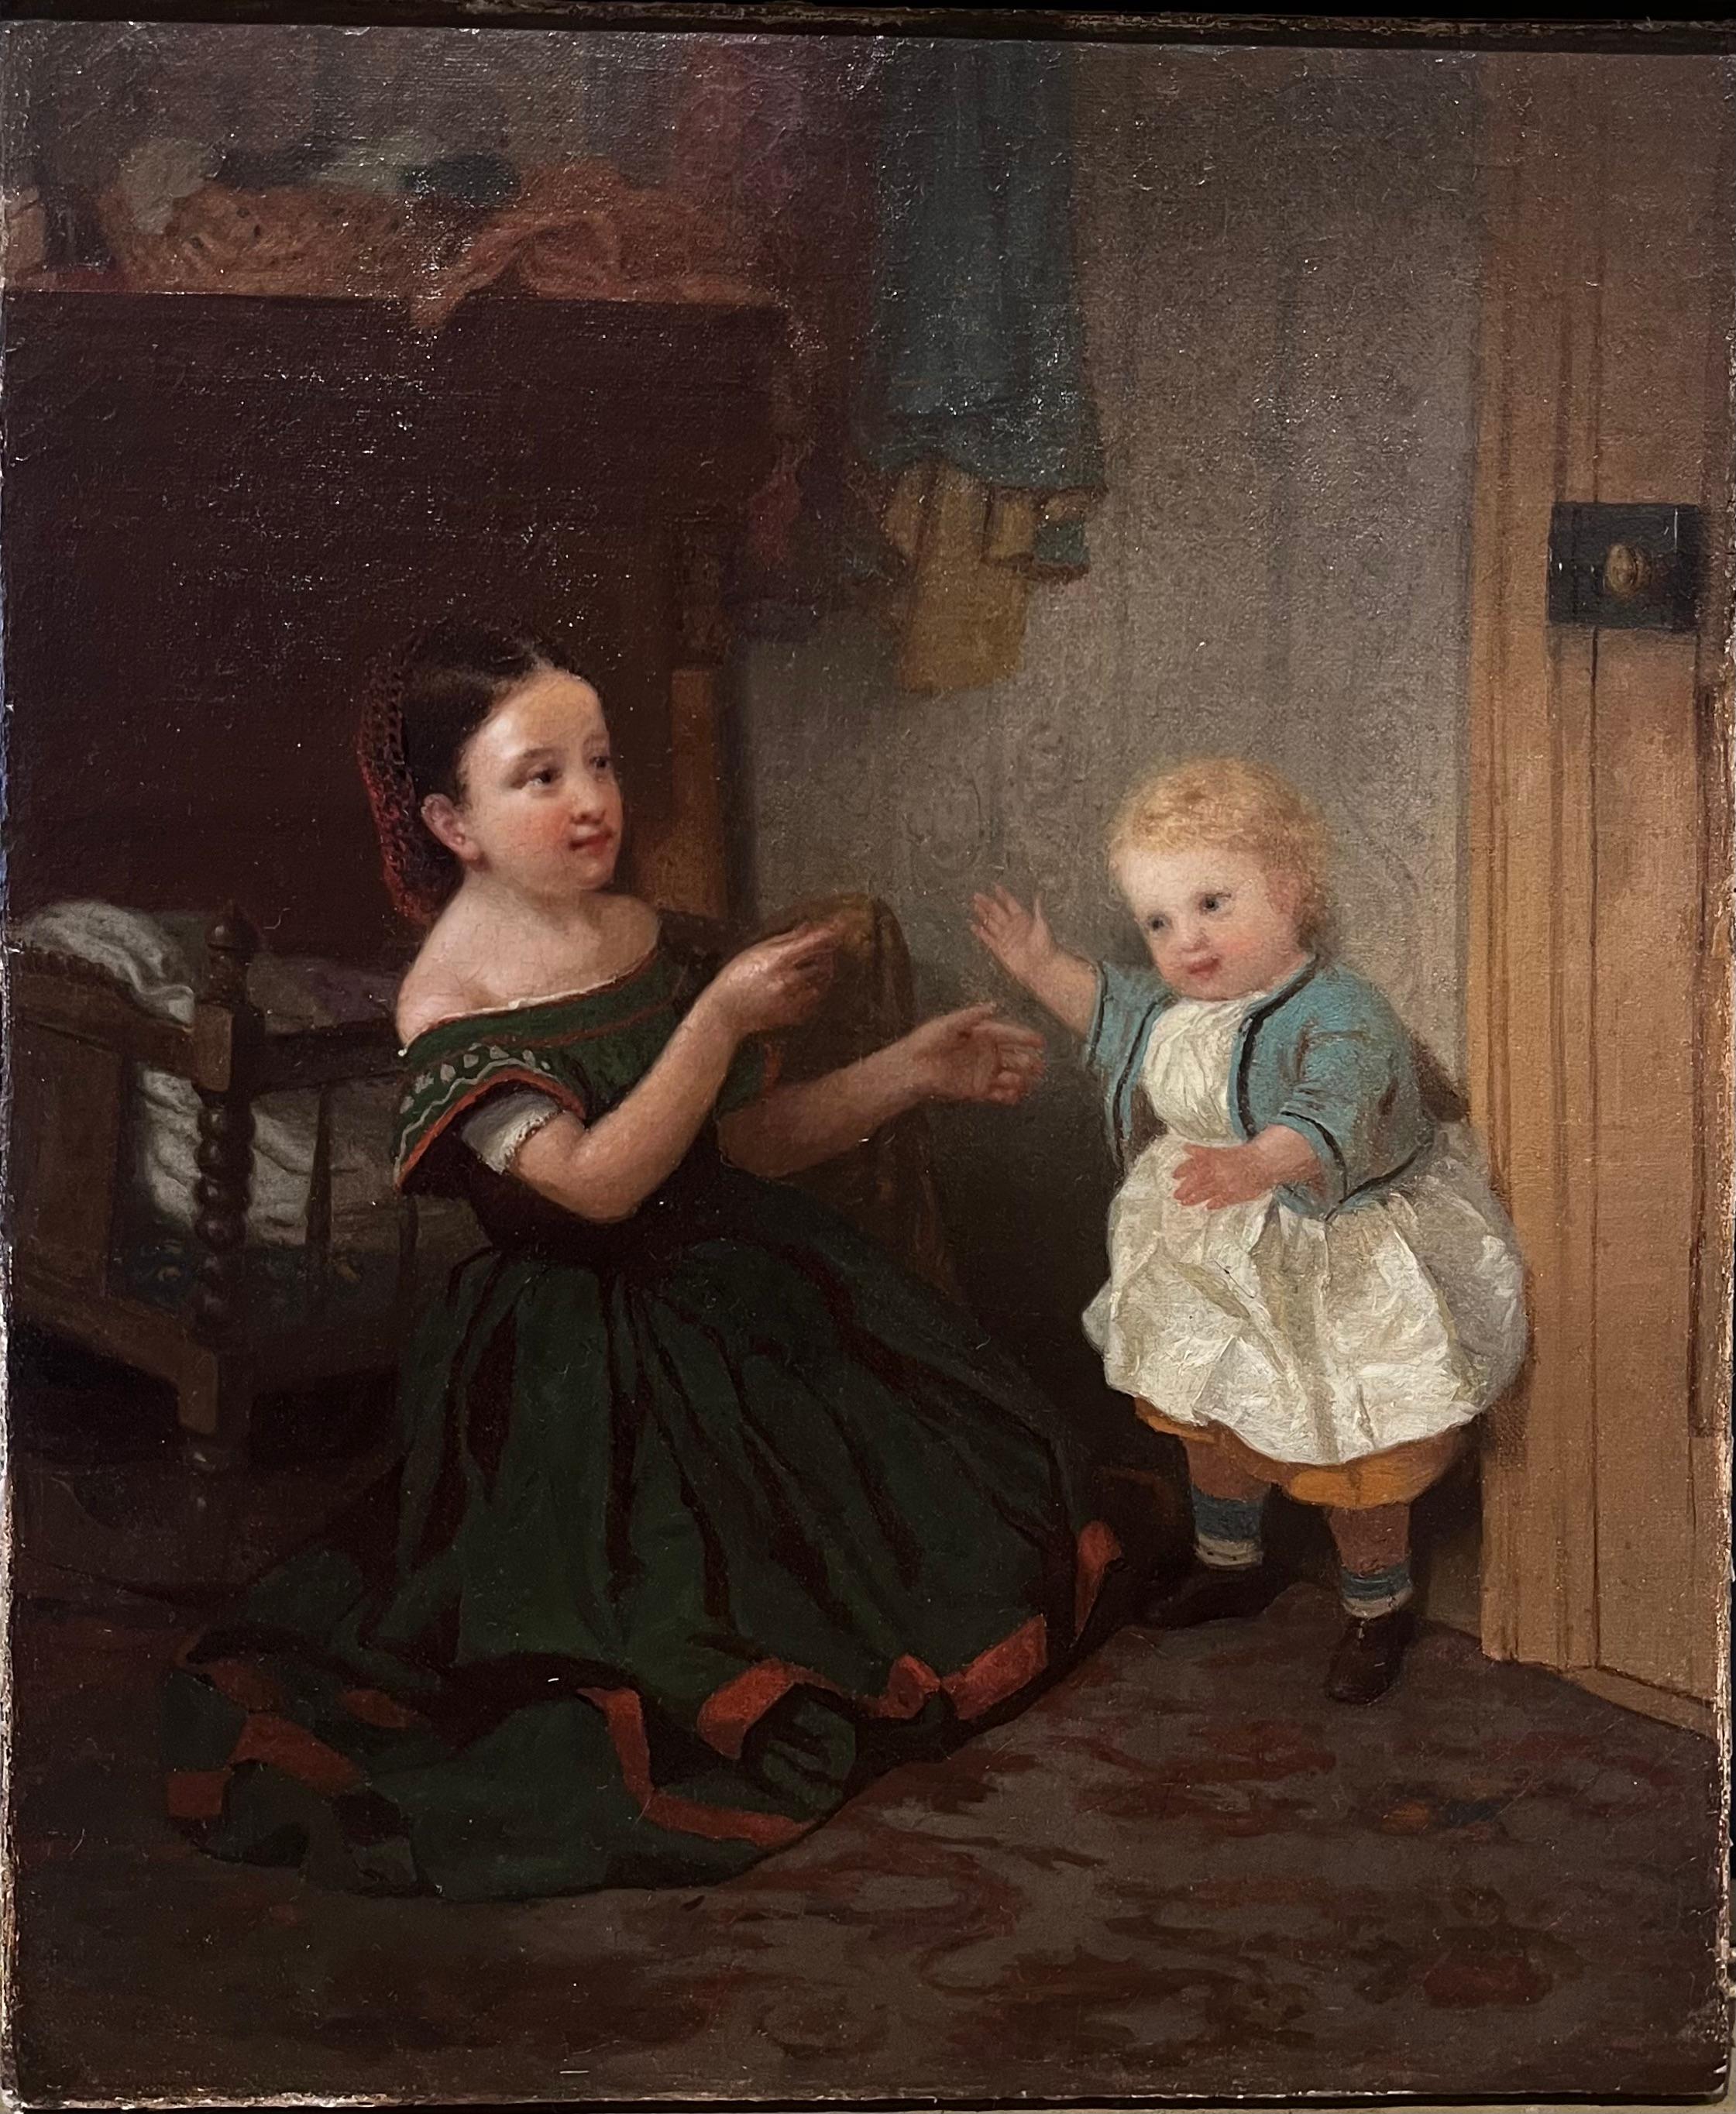 John George Brown Portrait Painting - Oil Portrait of Child and Baby Sisters Playing